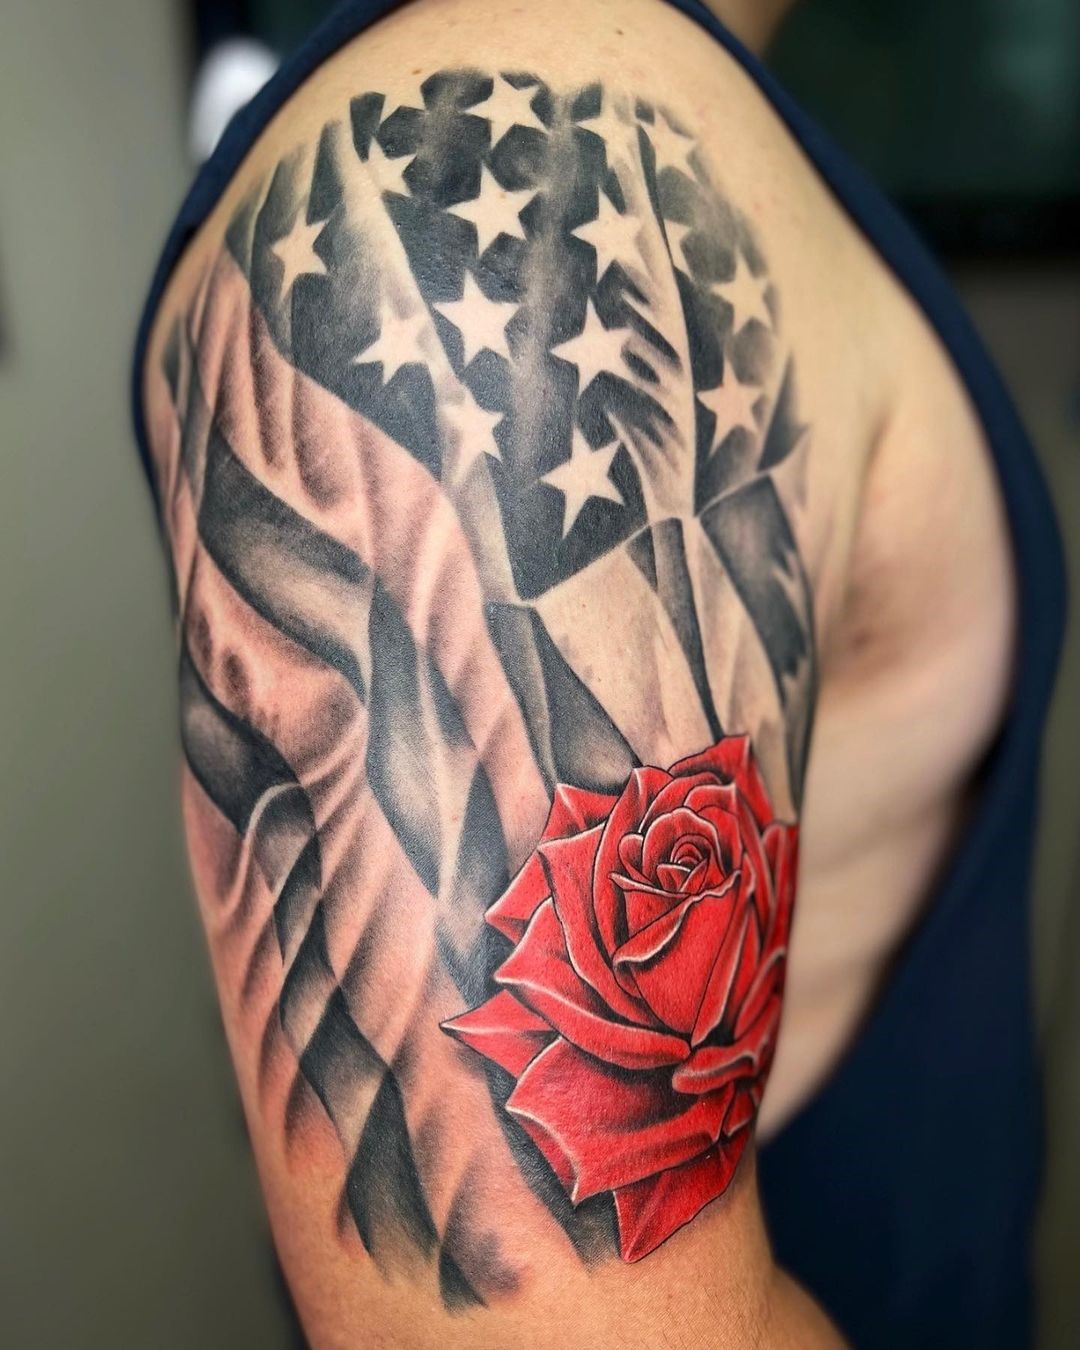 Shoulder American Flag Tattoo With A Rose 